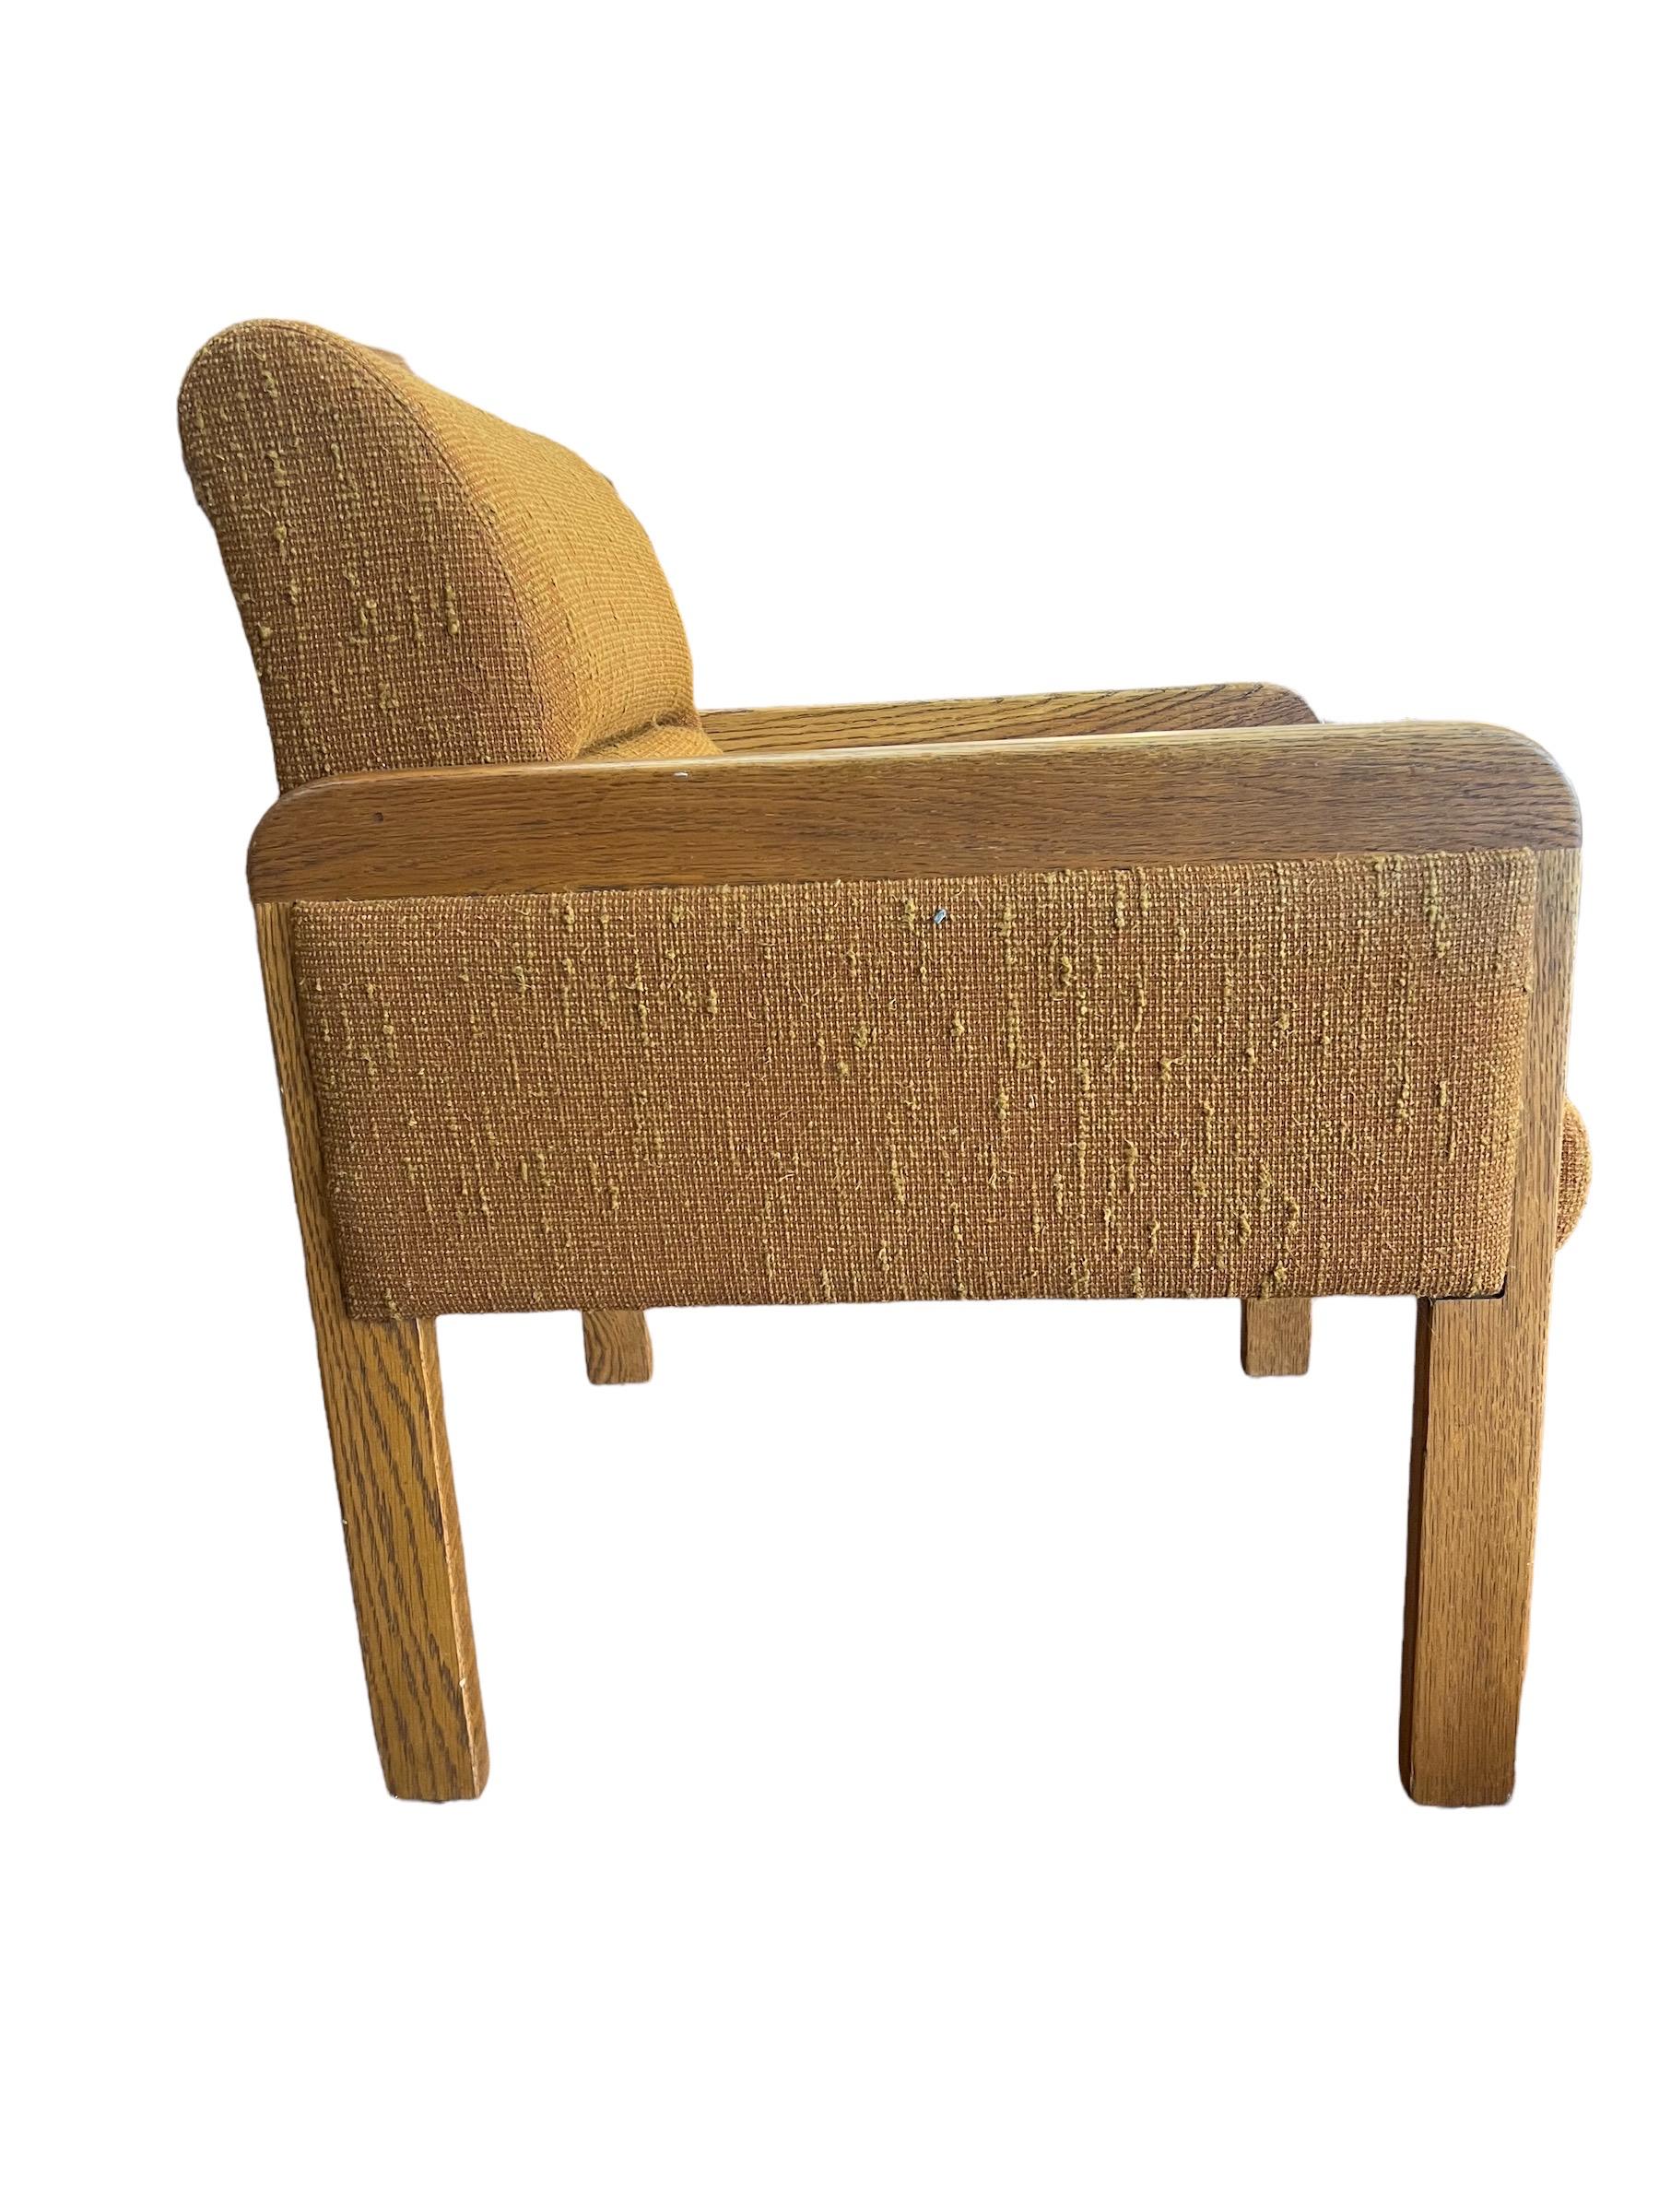 Vintage Solid Oak Upholstered Mid-Century Modern Sofa Chair For Sale 3